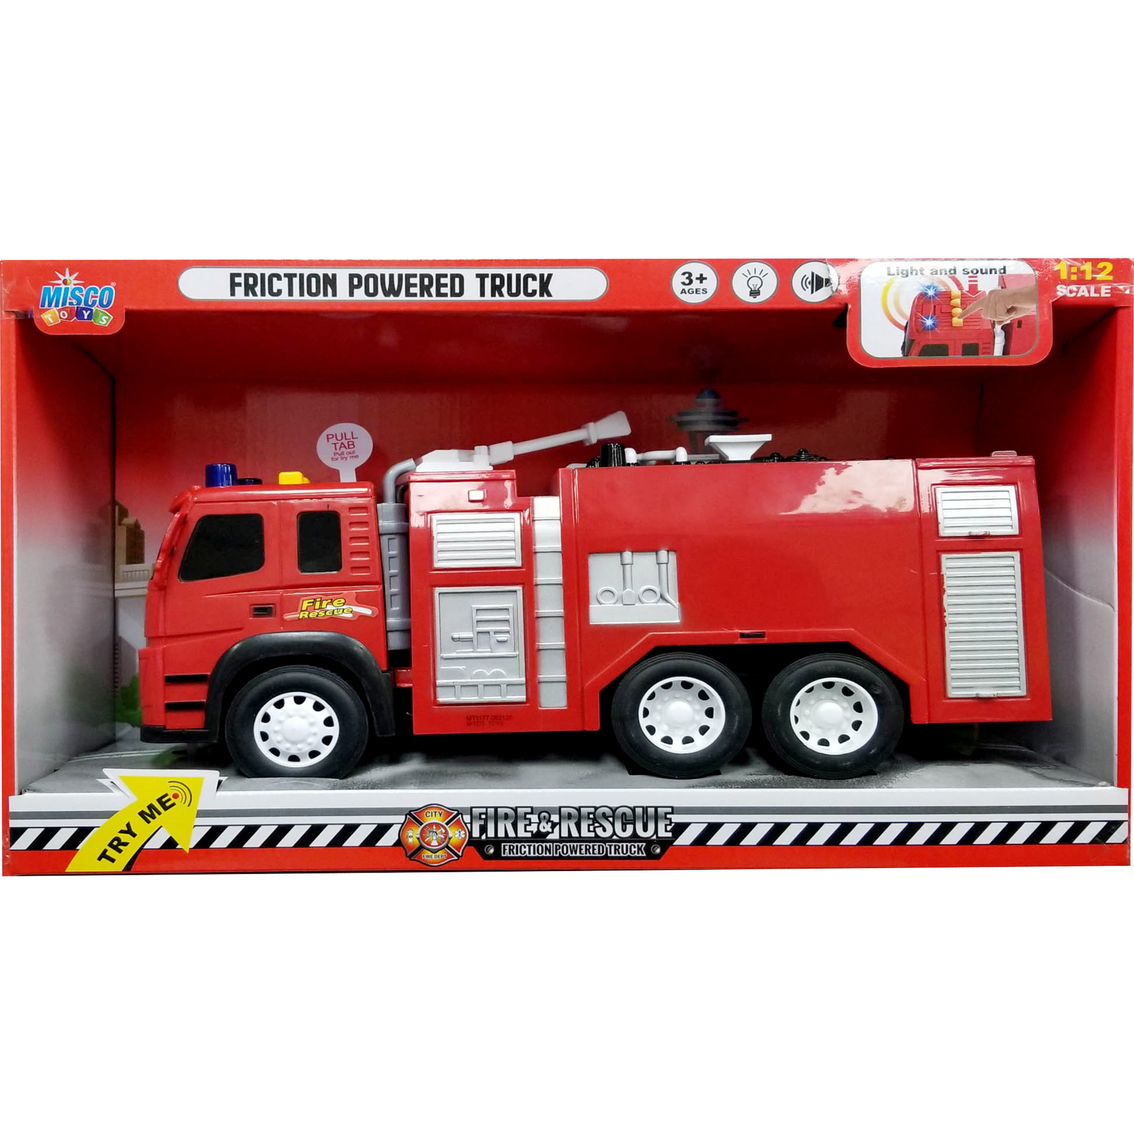 2 Years Old Boys Friction Powered Fire Engine Toy Rescue Truck Car High Quality 